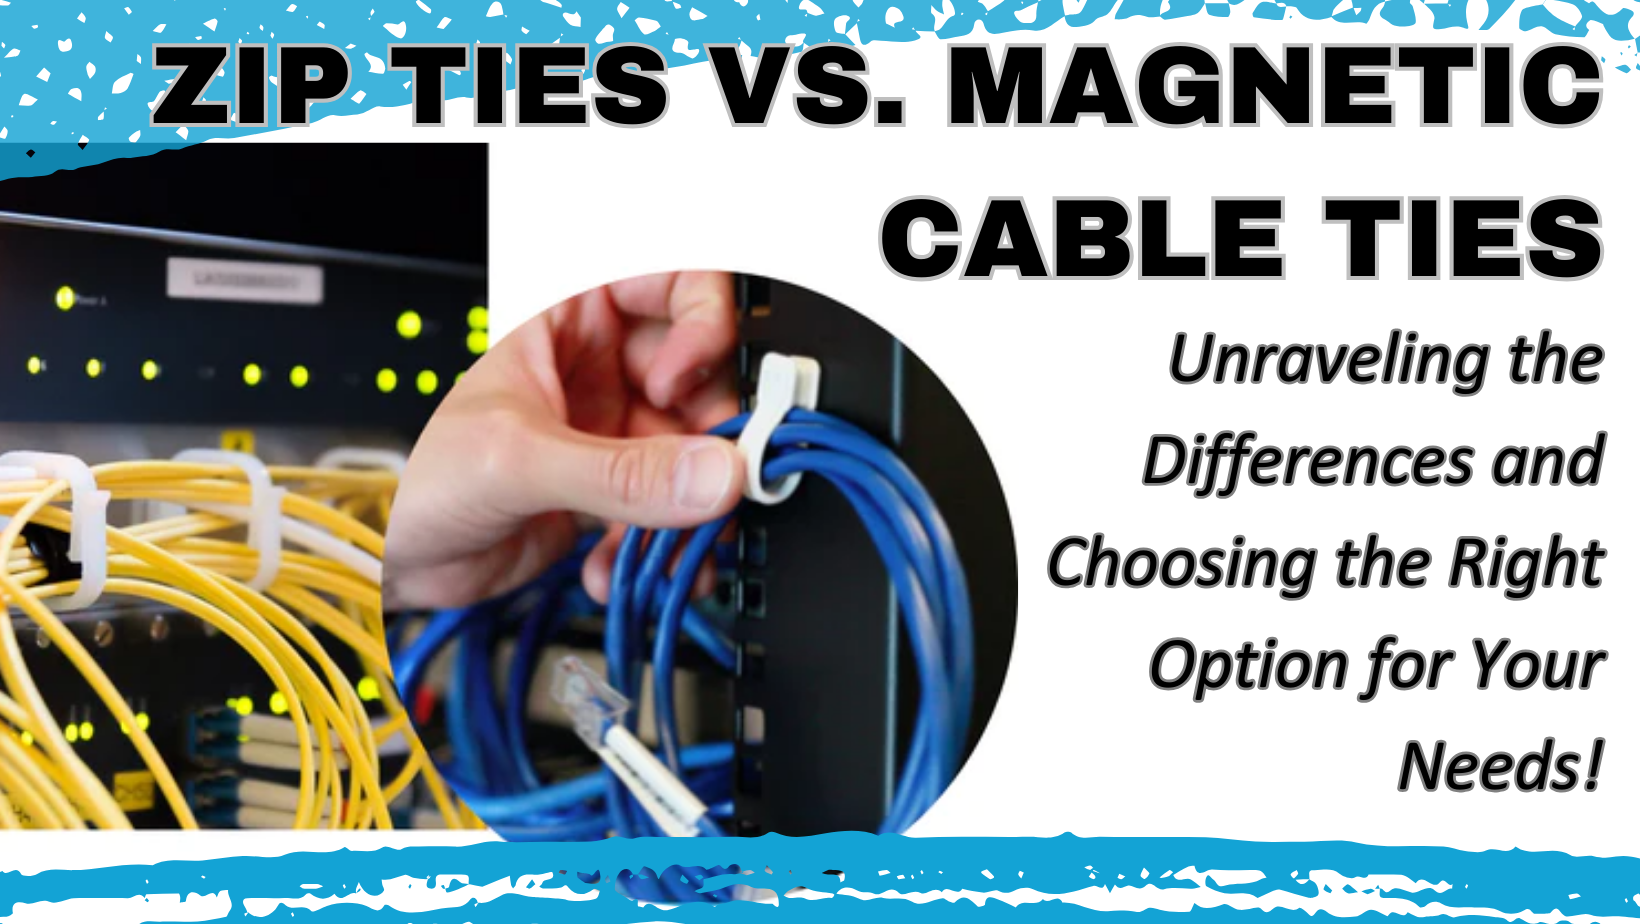 Zip Ties vs. Magnetic Cable Ties: Unraveling the Differences and Choosing the Right Option for Your Needs!